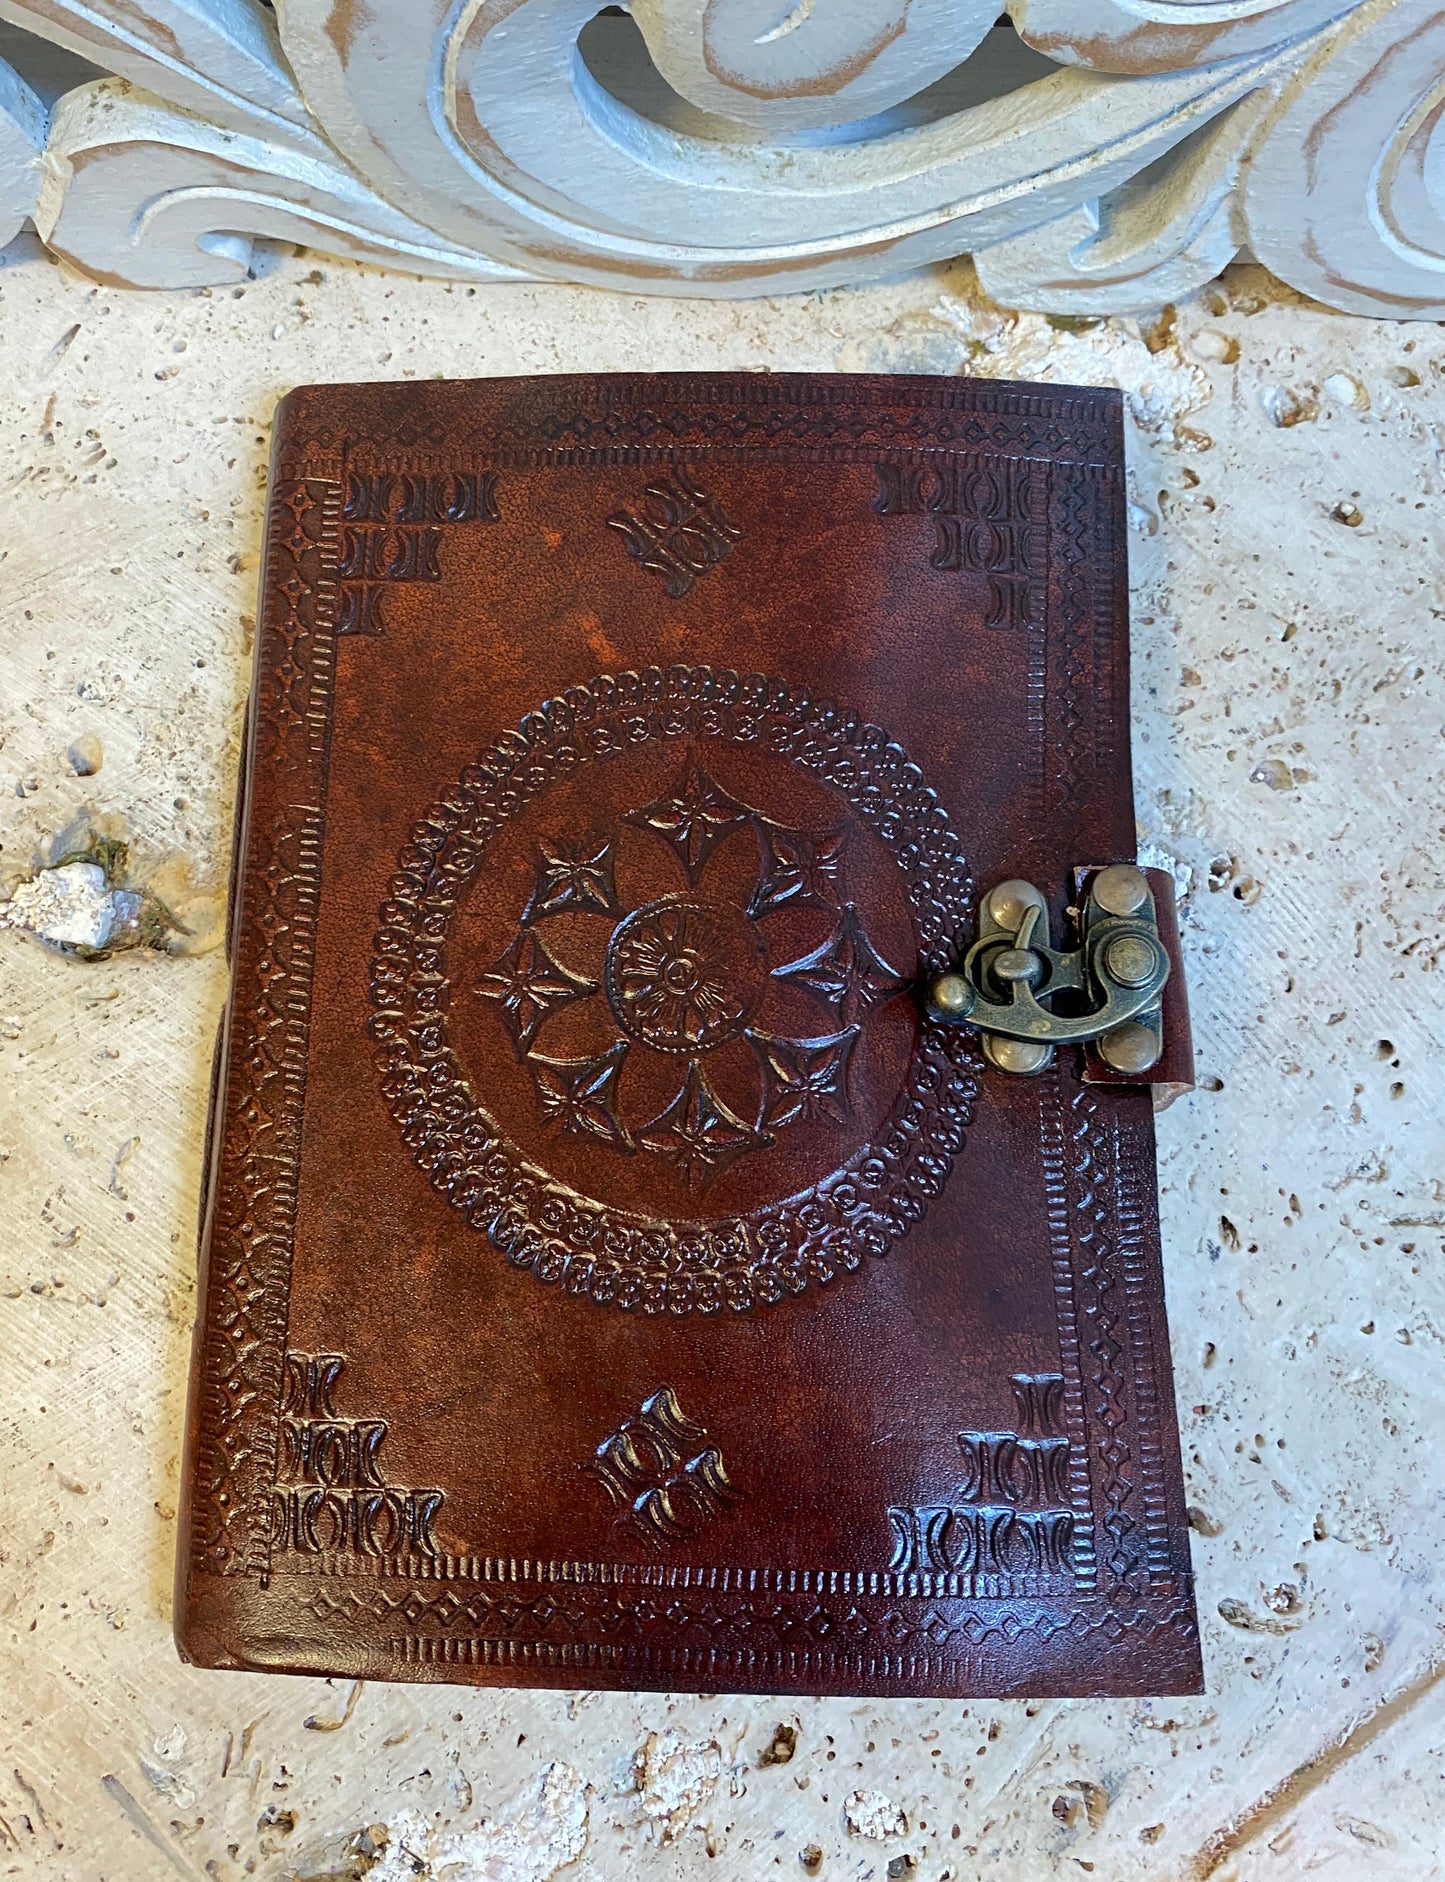 Hand Embossed Camel leather Journal with Buckle Latch - 5" x 7"x 1/2" - Available in 3 Designs